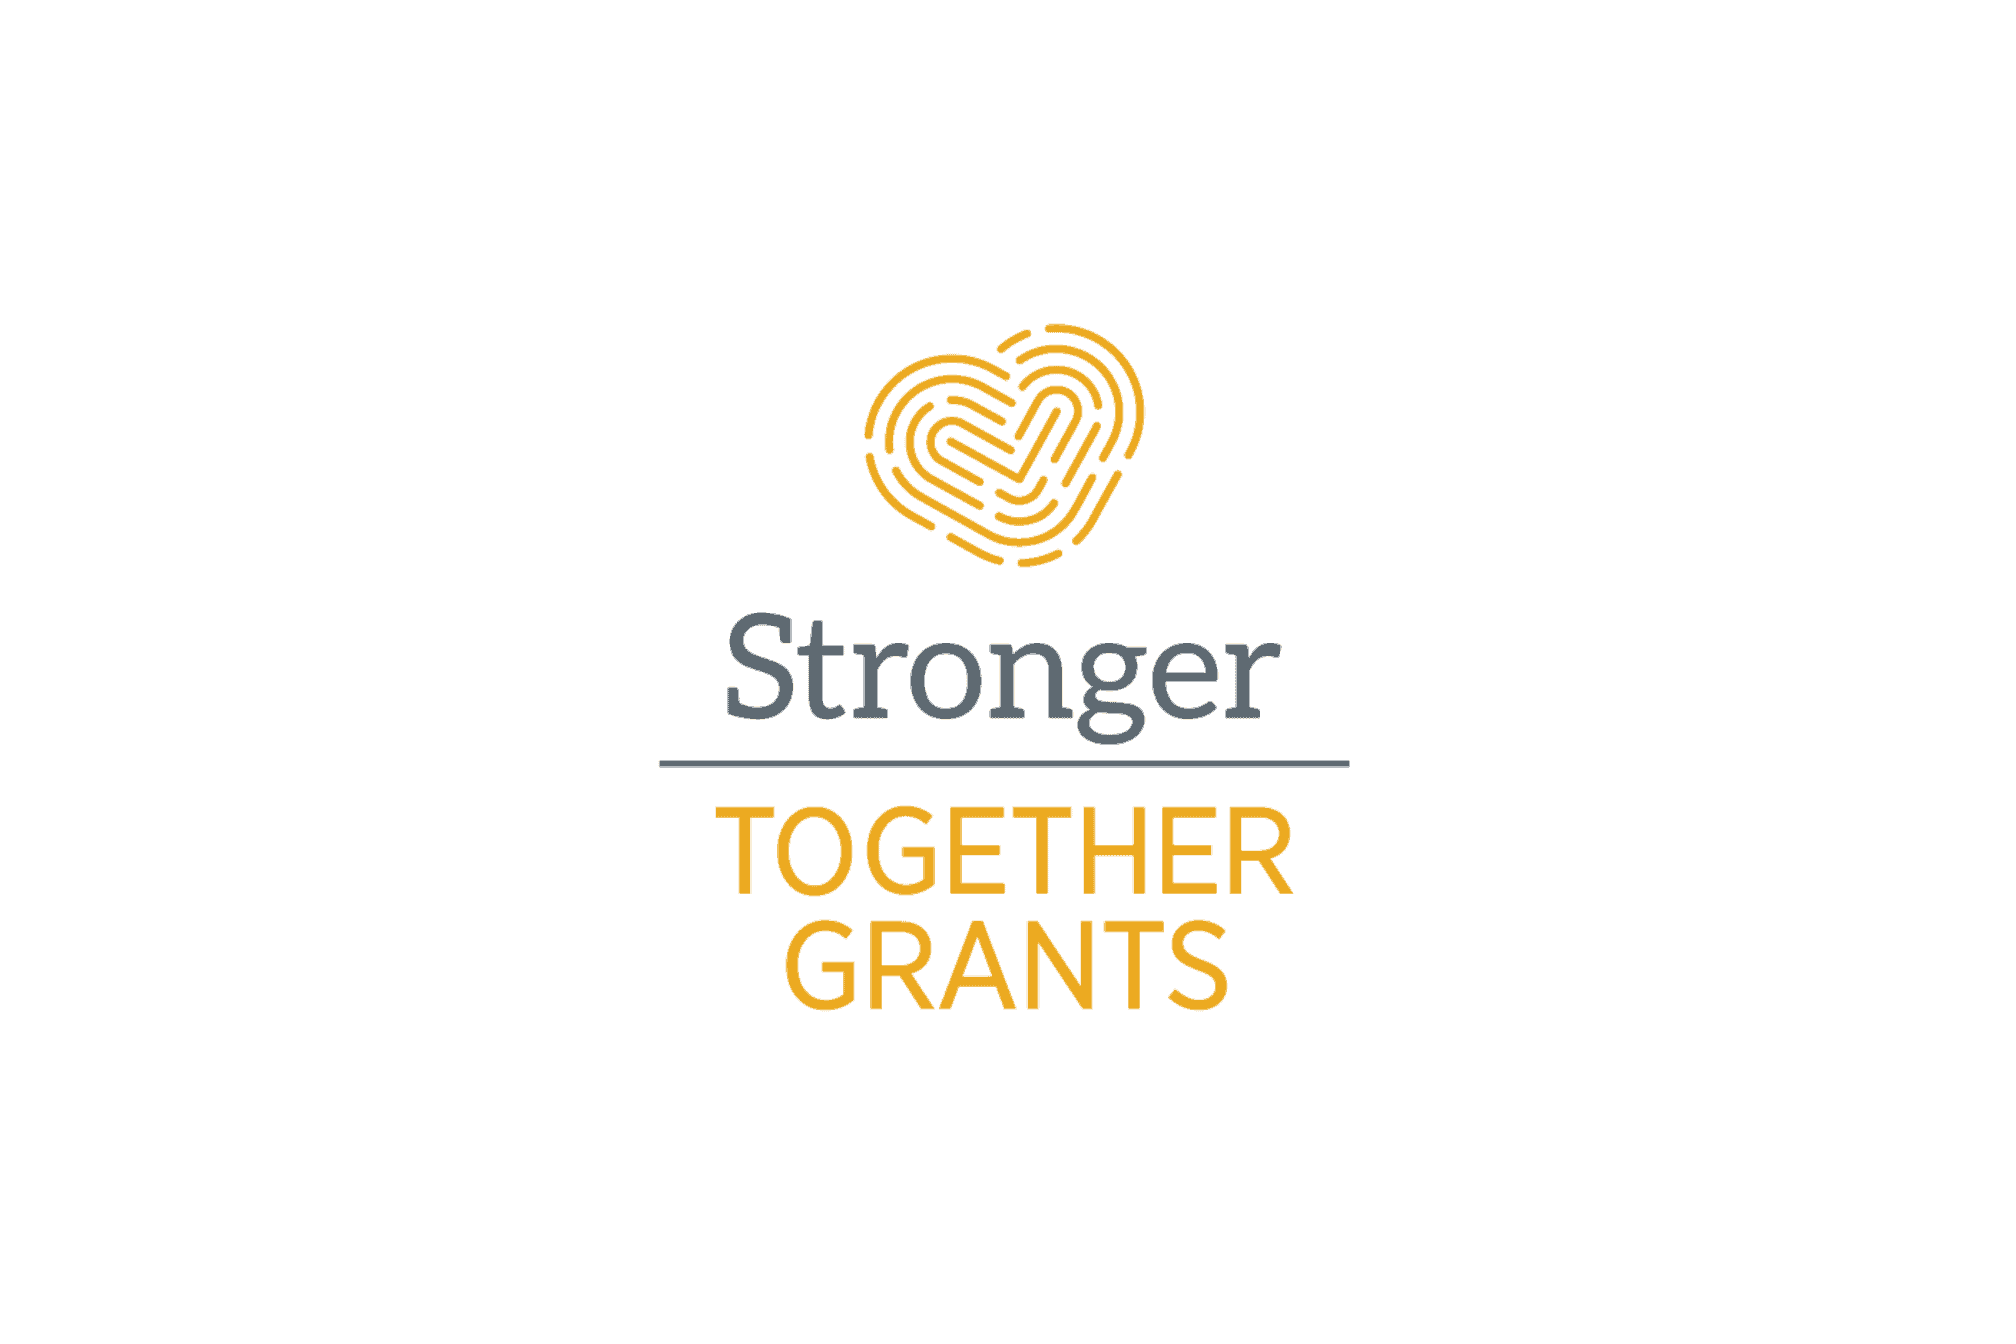 Stonger Together Grants logo represents the grant given to Himalayan Life for their Yangri Outdoor Centre.